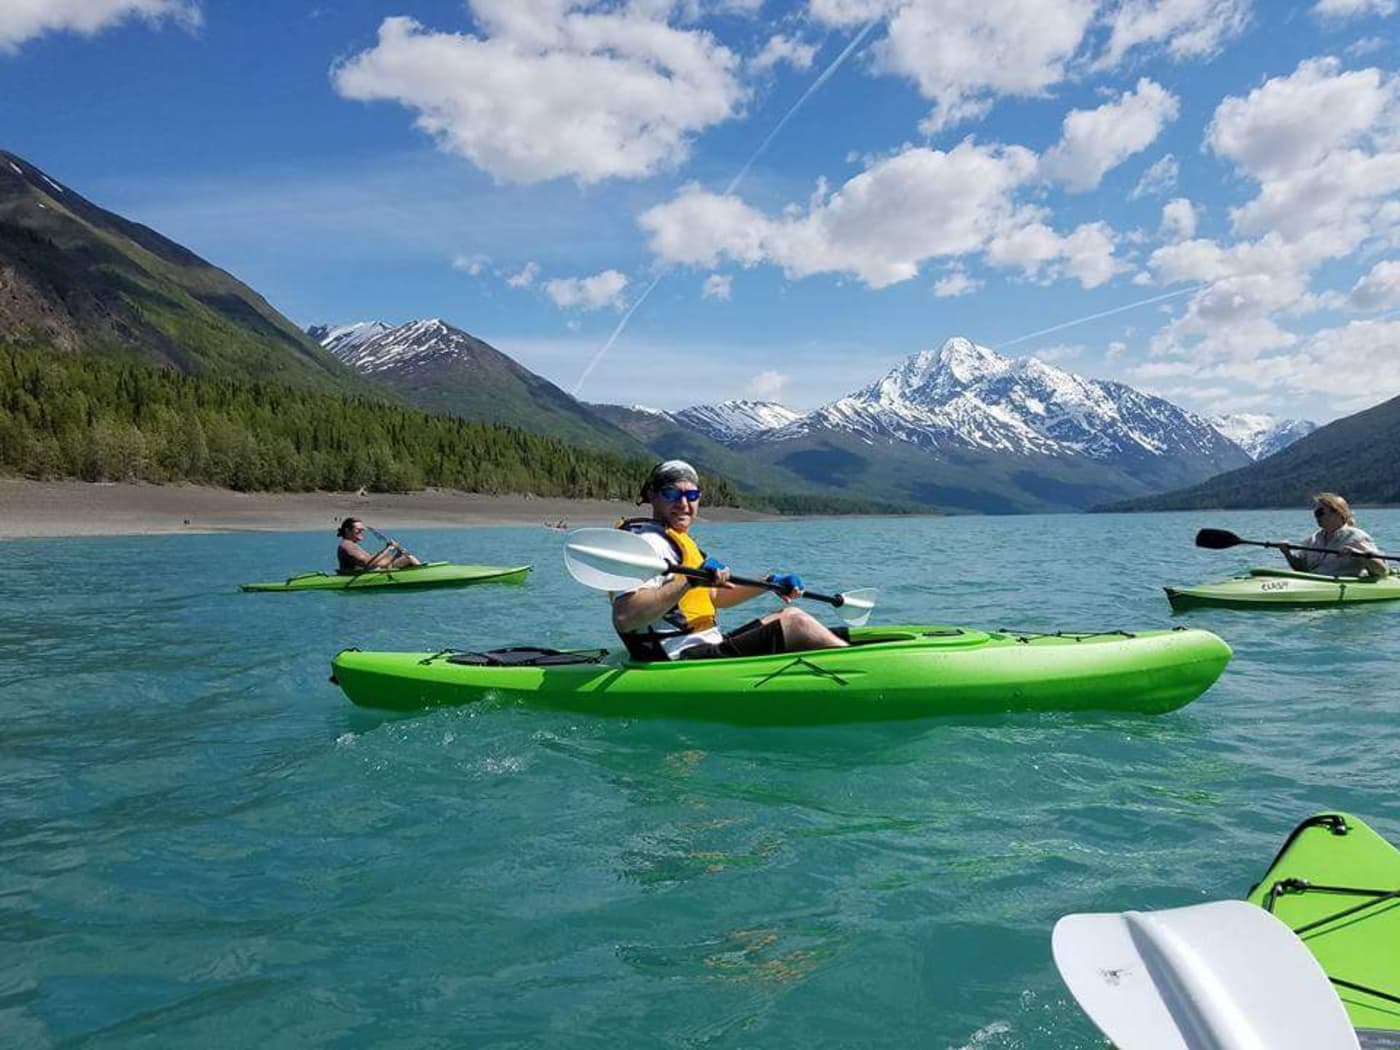 Kayakers on the glacial Eklutna Lake on a sunny day with snowcapped mountains in the distance.